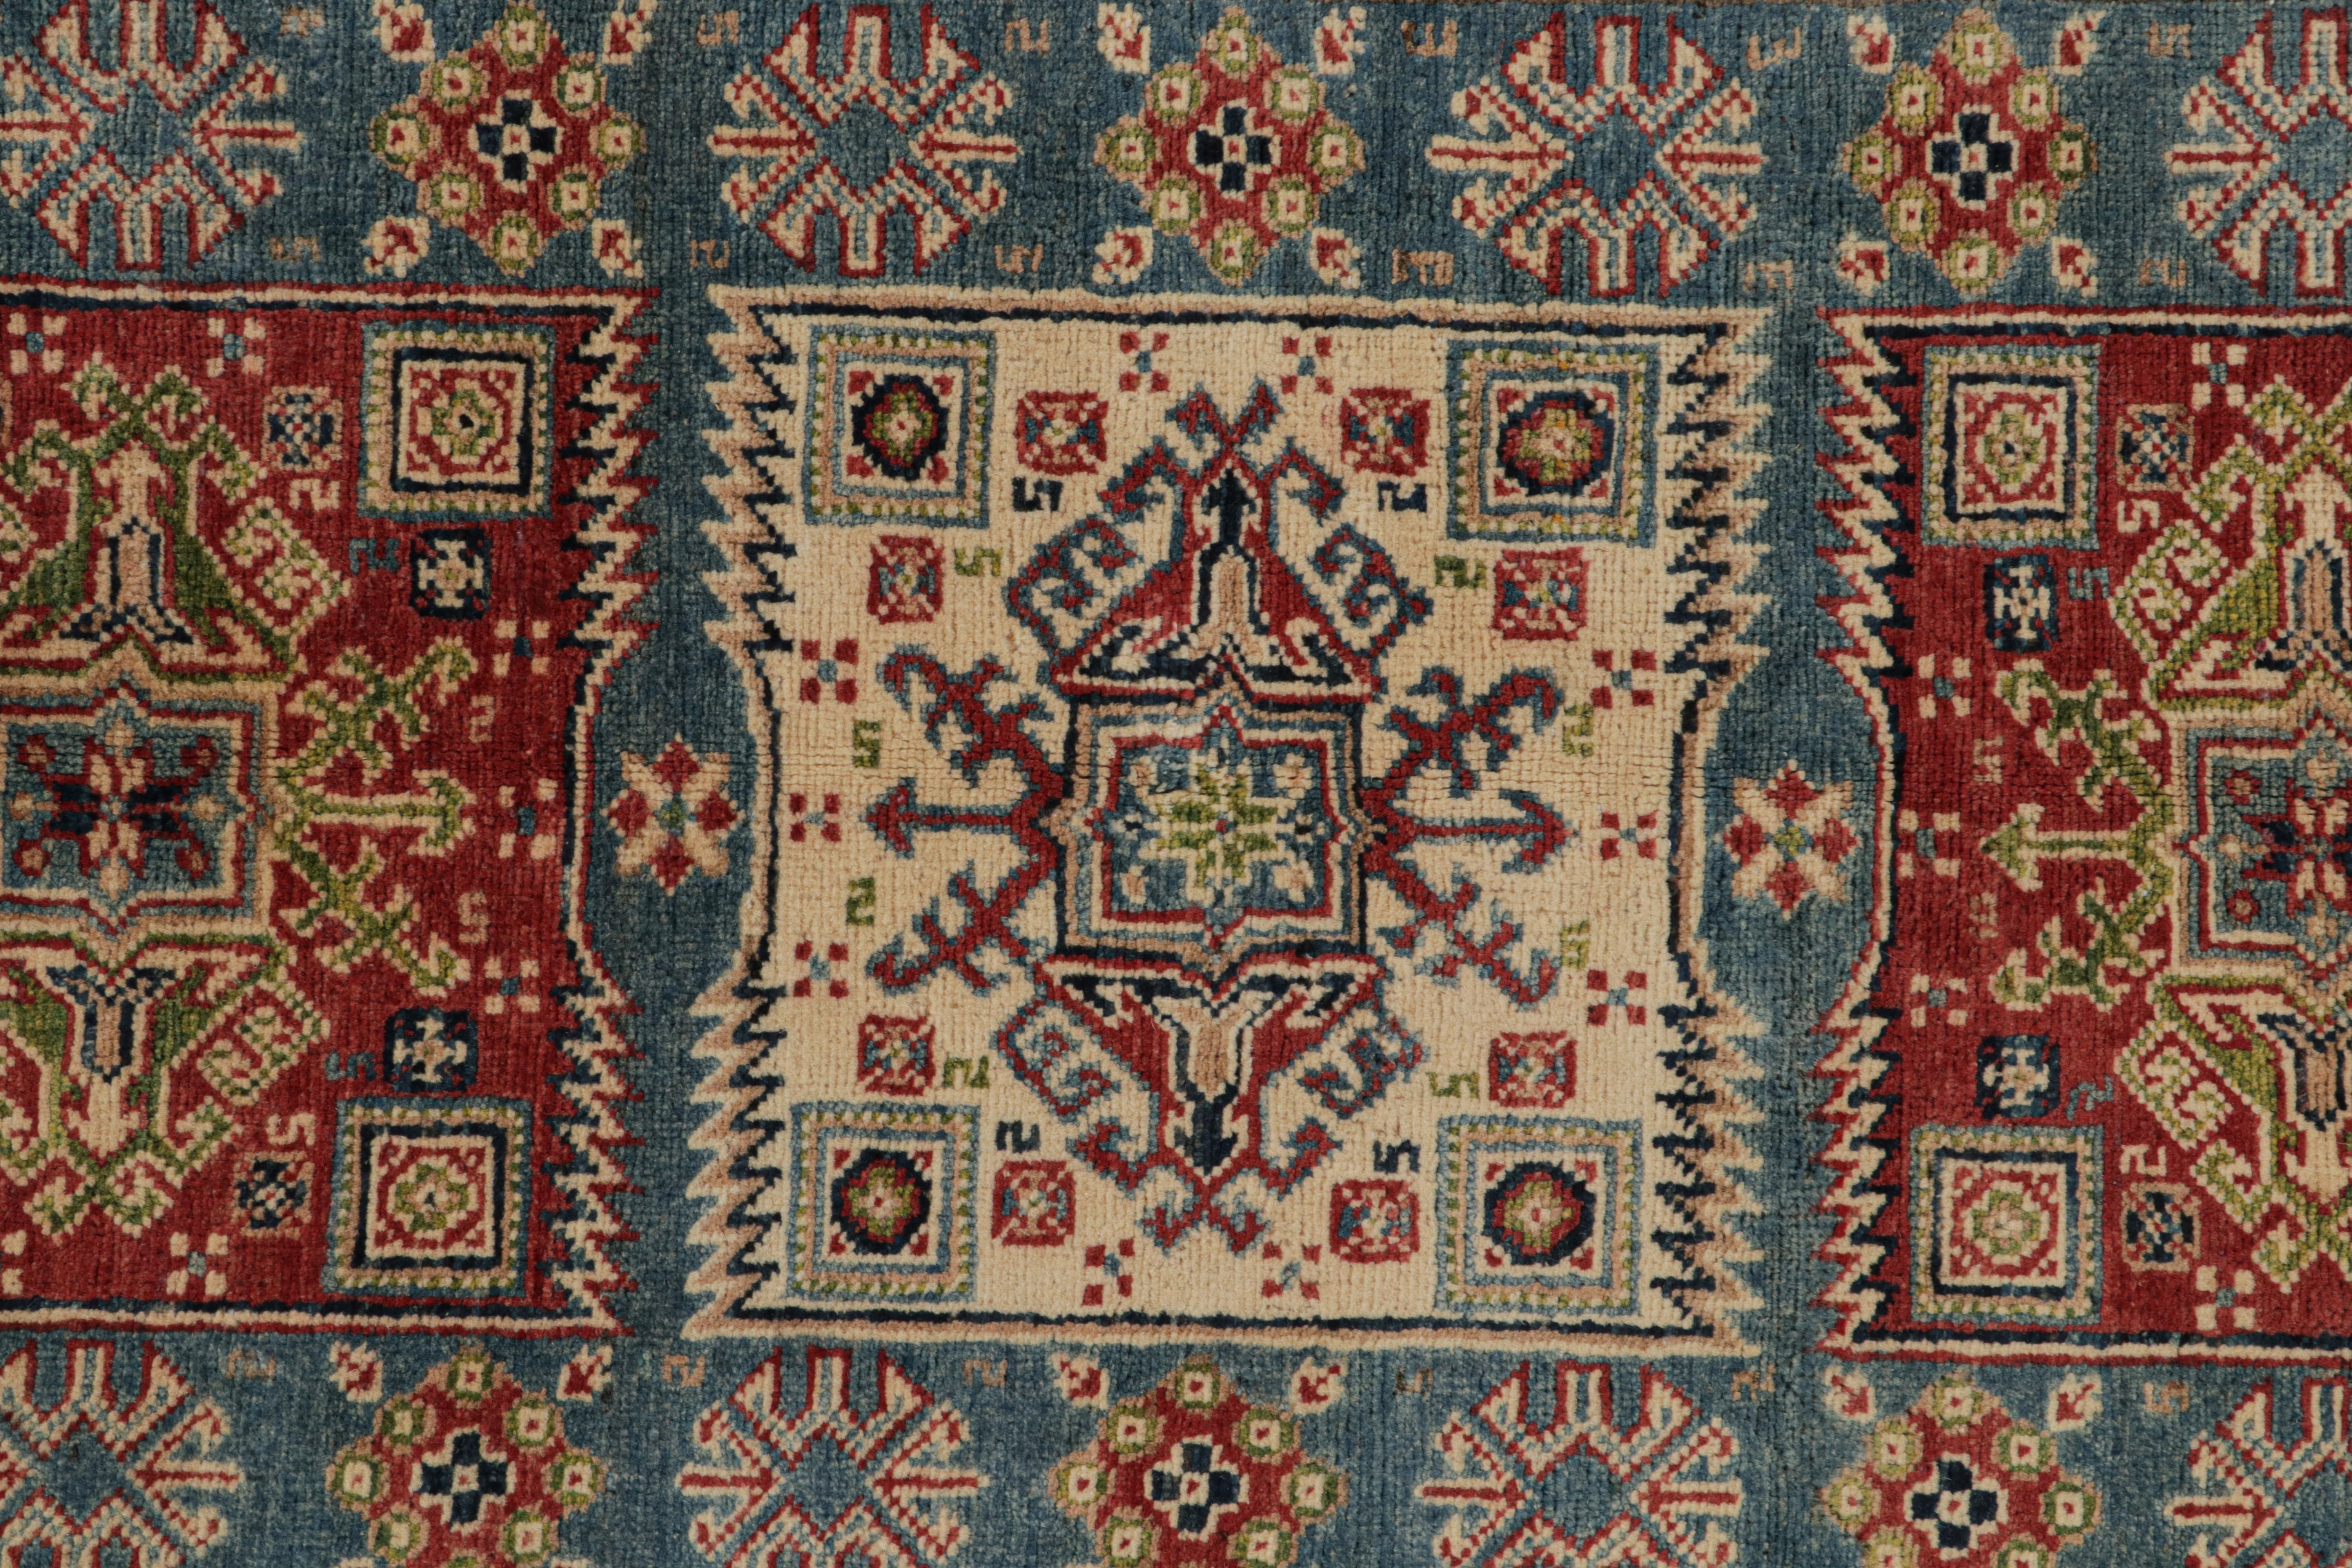 Rug & Kilim’s Kazak style rug in Red, Blue and Beige-Brown Geometric Patterns In New Condition For Sale In Long Island City, NY